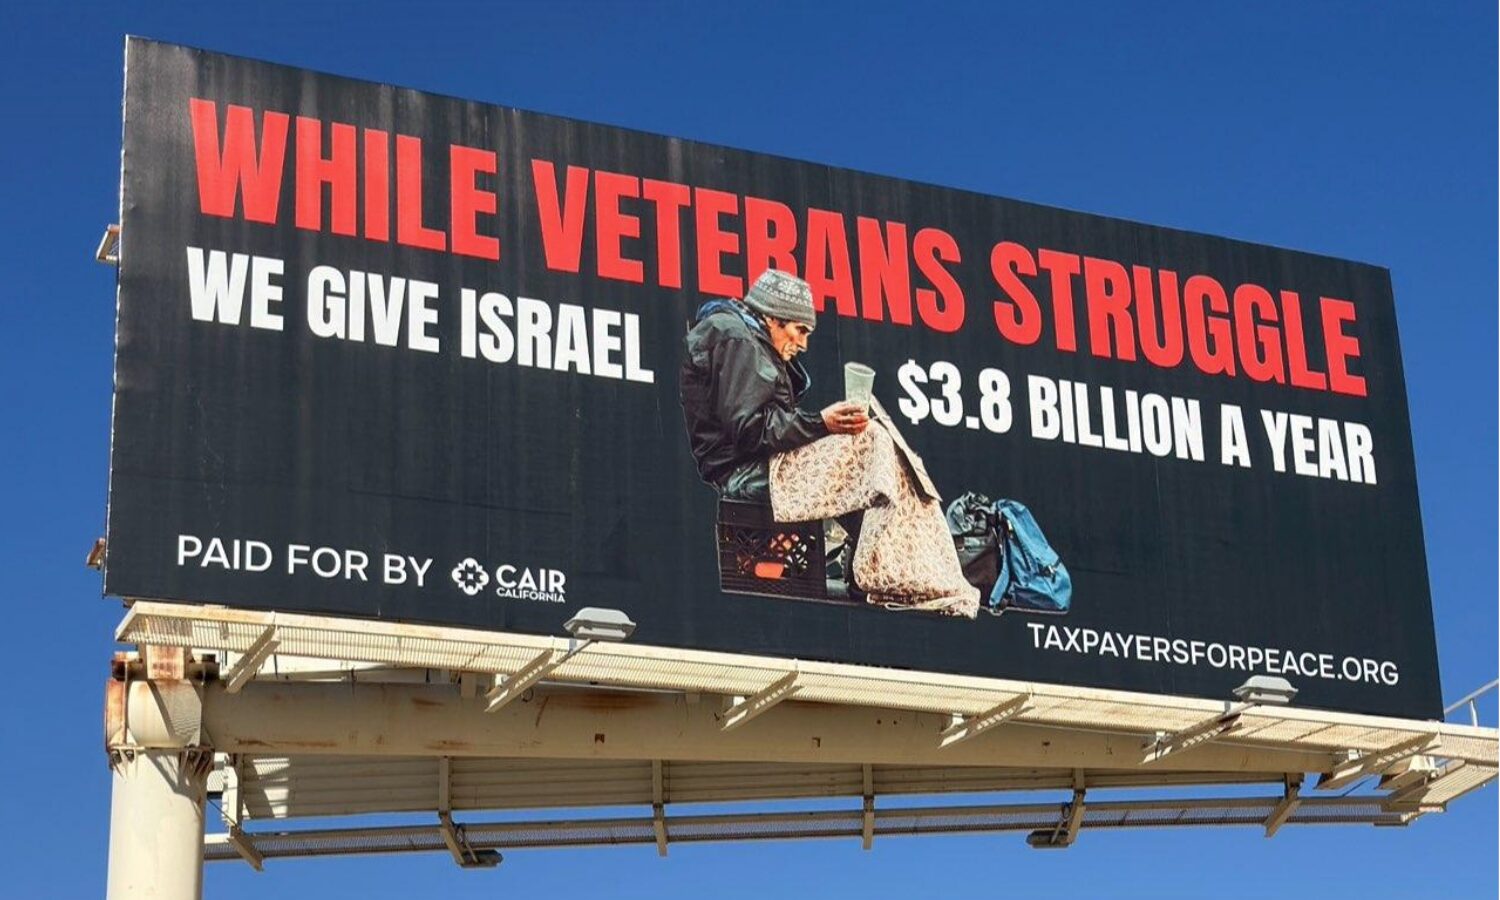 While Veterans Struggle, We Give Israel $3.8 Billion A Year